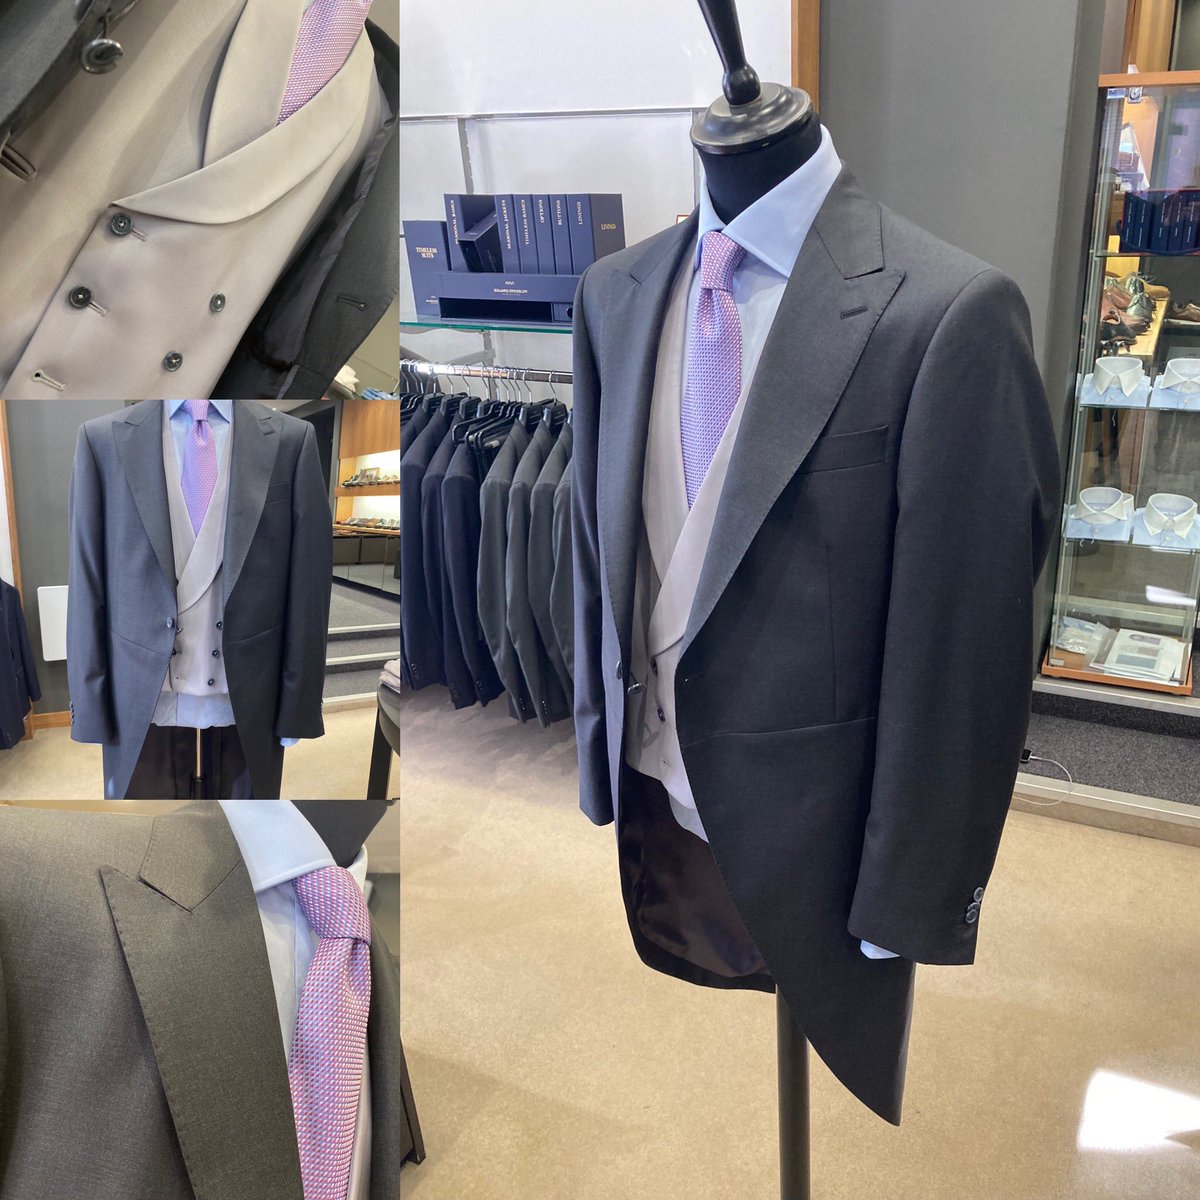 Made to Measure Classic grey tailcoat / trouser set with dove grey DB waistcoat - this one will be proudly worn in Windsor Castle next month. So pleased we got to create this one. 

#madetomeasure #tailoring #belfast #thehomeofbelfasttailoring #mensstyle #style